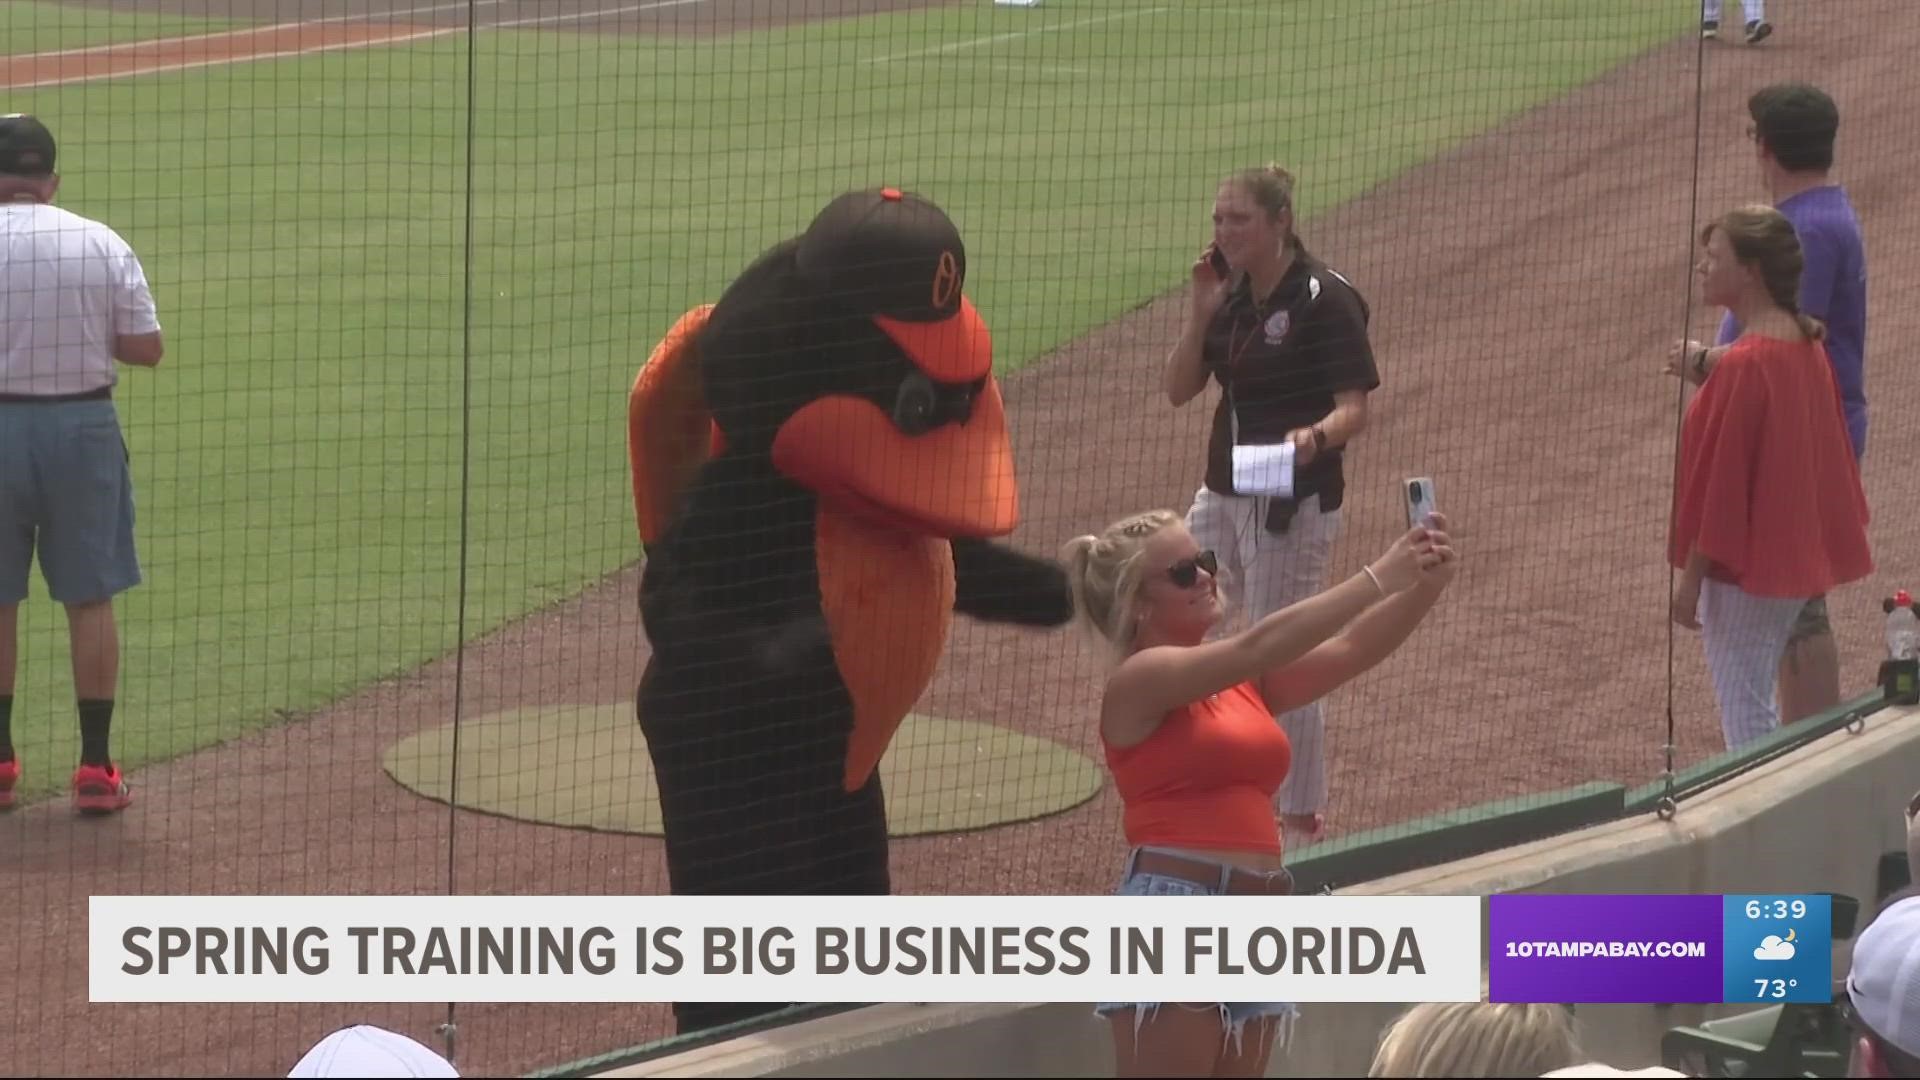 As spring training gets underway, a new study shows just how profitable the tradition is for Florida's economy.